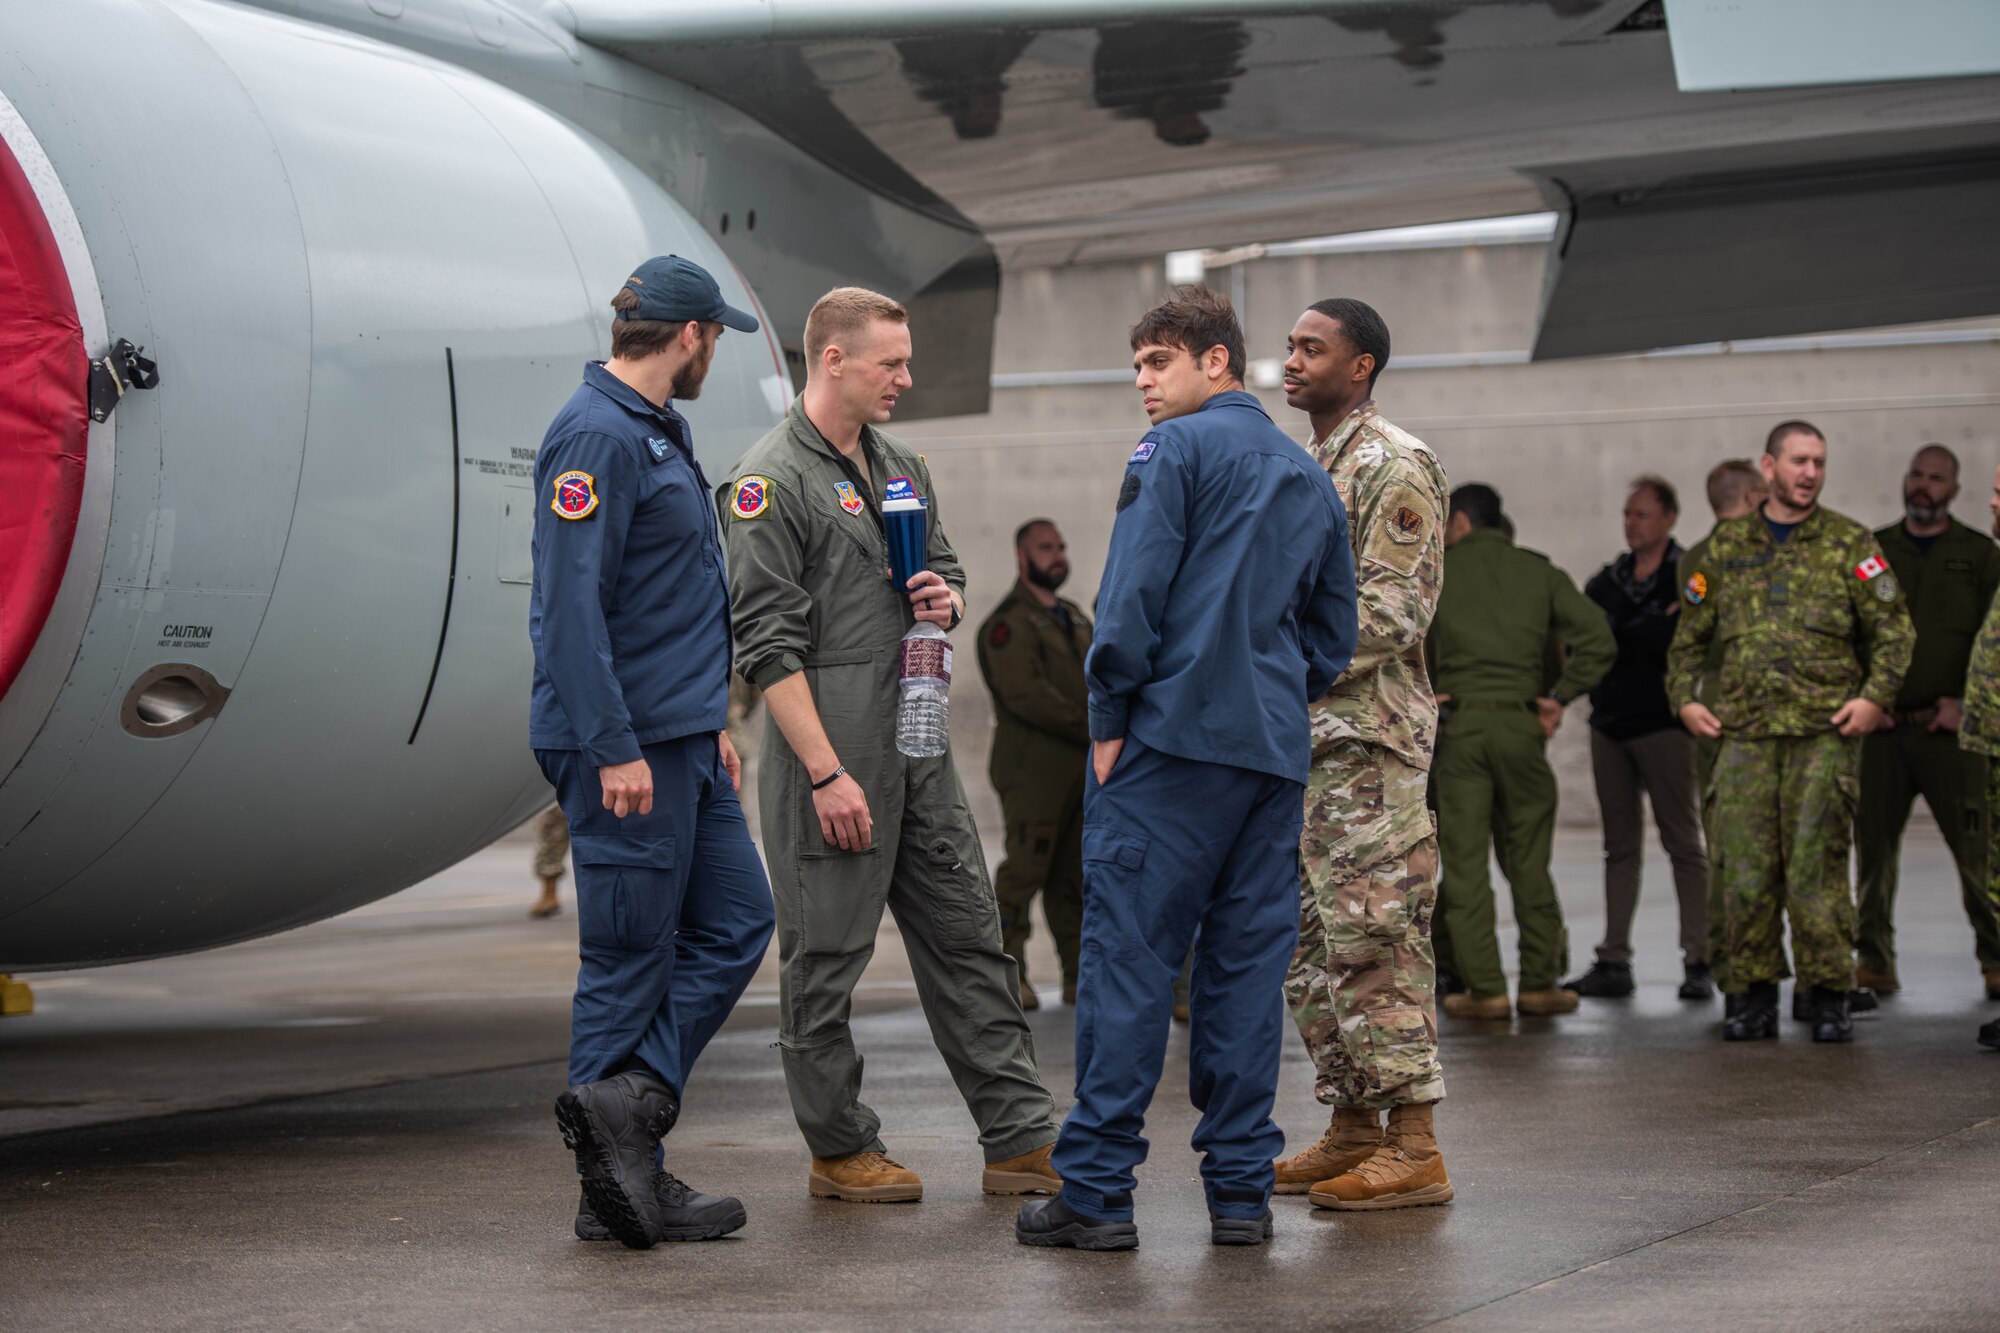 Two members from the U.S. Air Force talk with two military members from New Zealand